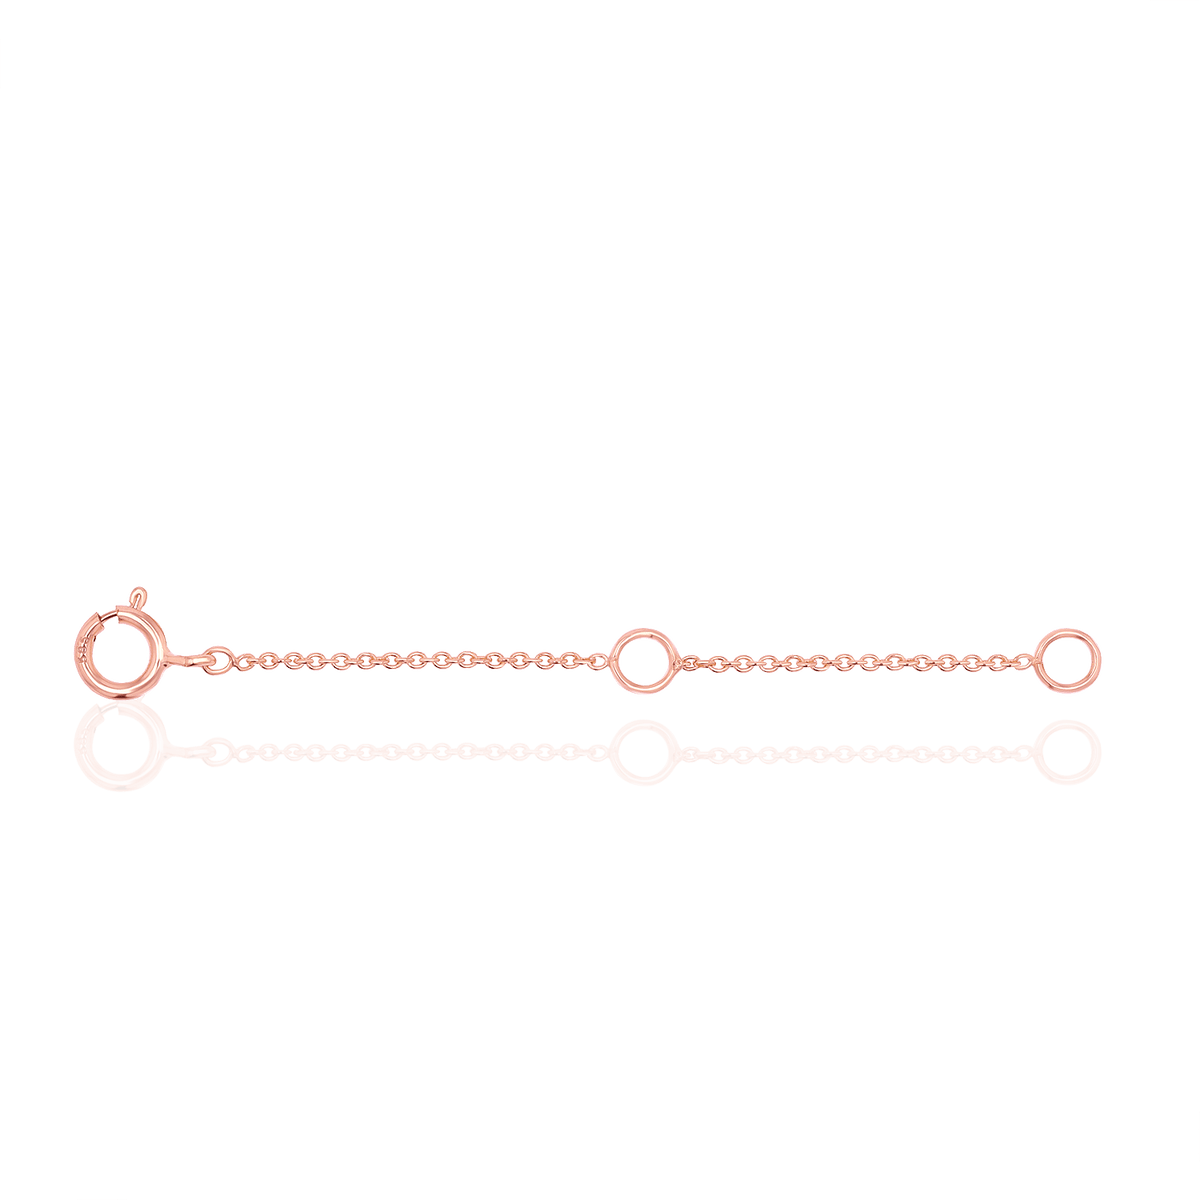 Mejuri 14K Yellow Gold Chain Necklaces: Chain Extender 14K Yellow Gold